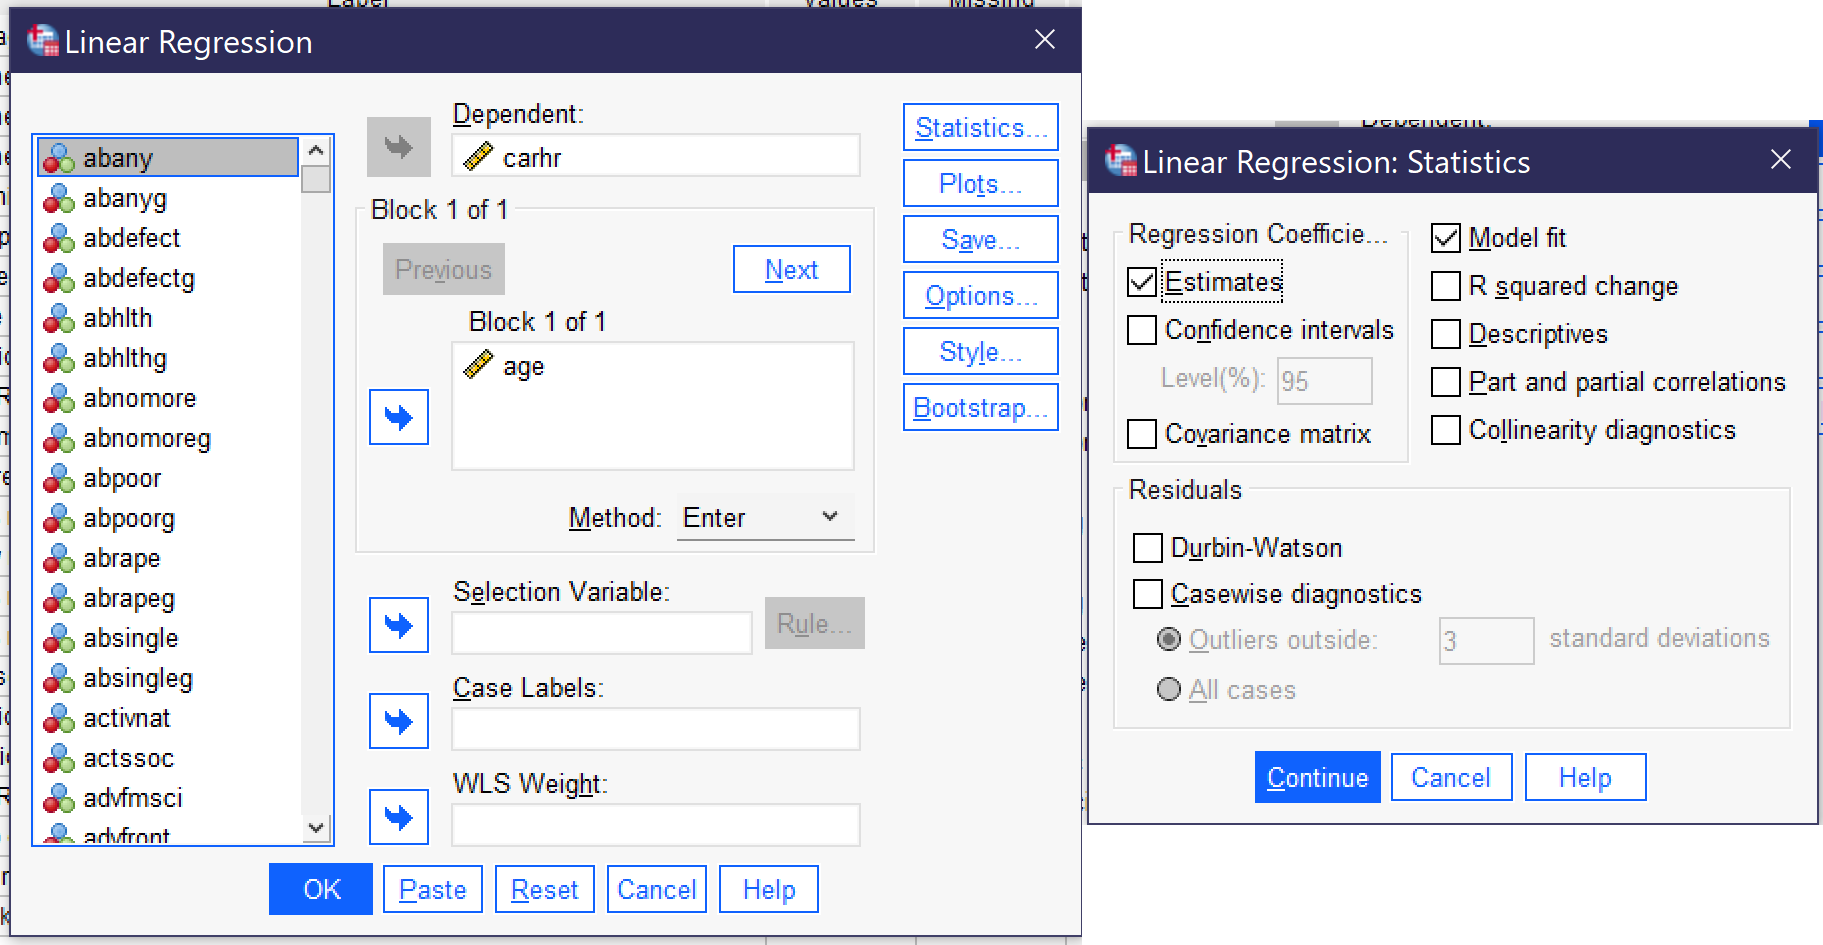 A screenshot of the linear regression dialog and the statistics popup from within the dialog. Alt+D navigates to the dependent variable box; tab must be used to get to the Block 1 of 1 box, where independent variables go. Alt+S opens the statistics window; here, Alt+E toggles displaying estimates and Alt+M toggles displaying Model Fit (both of these should stay on). There are many, many other options both in the main window and in the statistics window, but these are beyond the scope of the chapter.